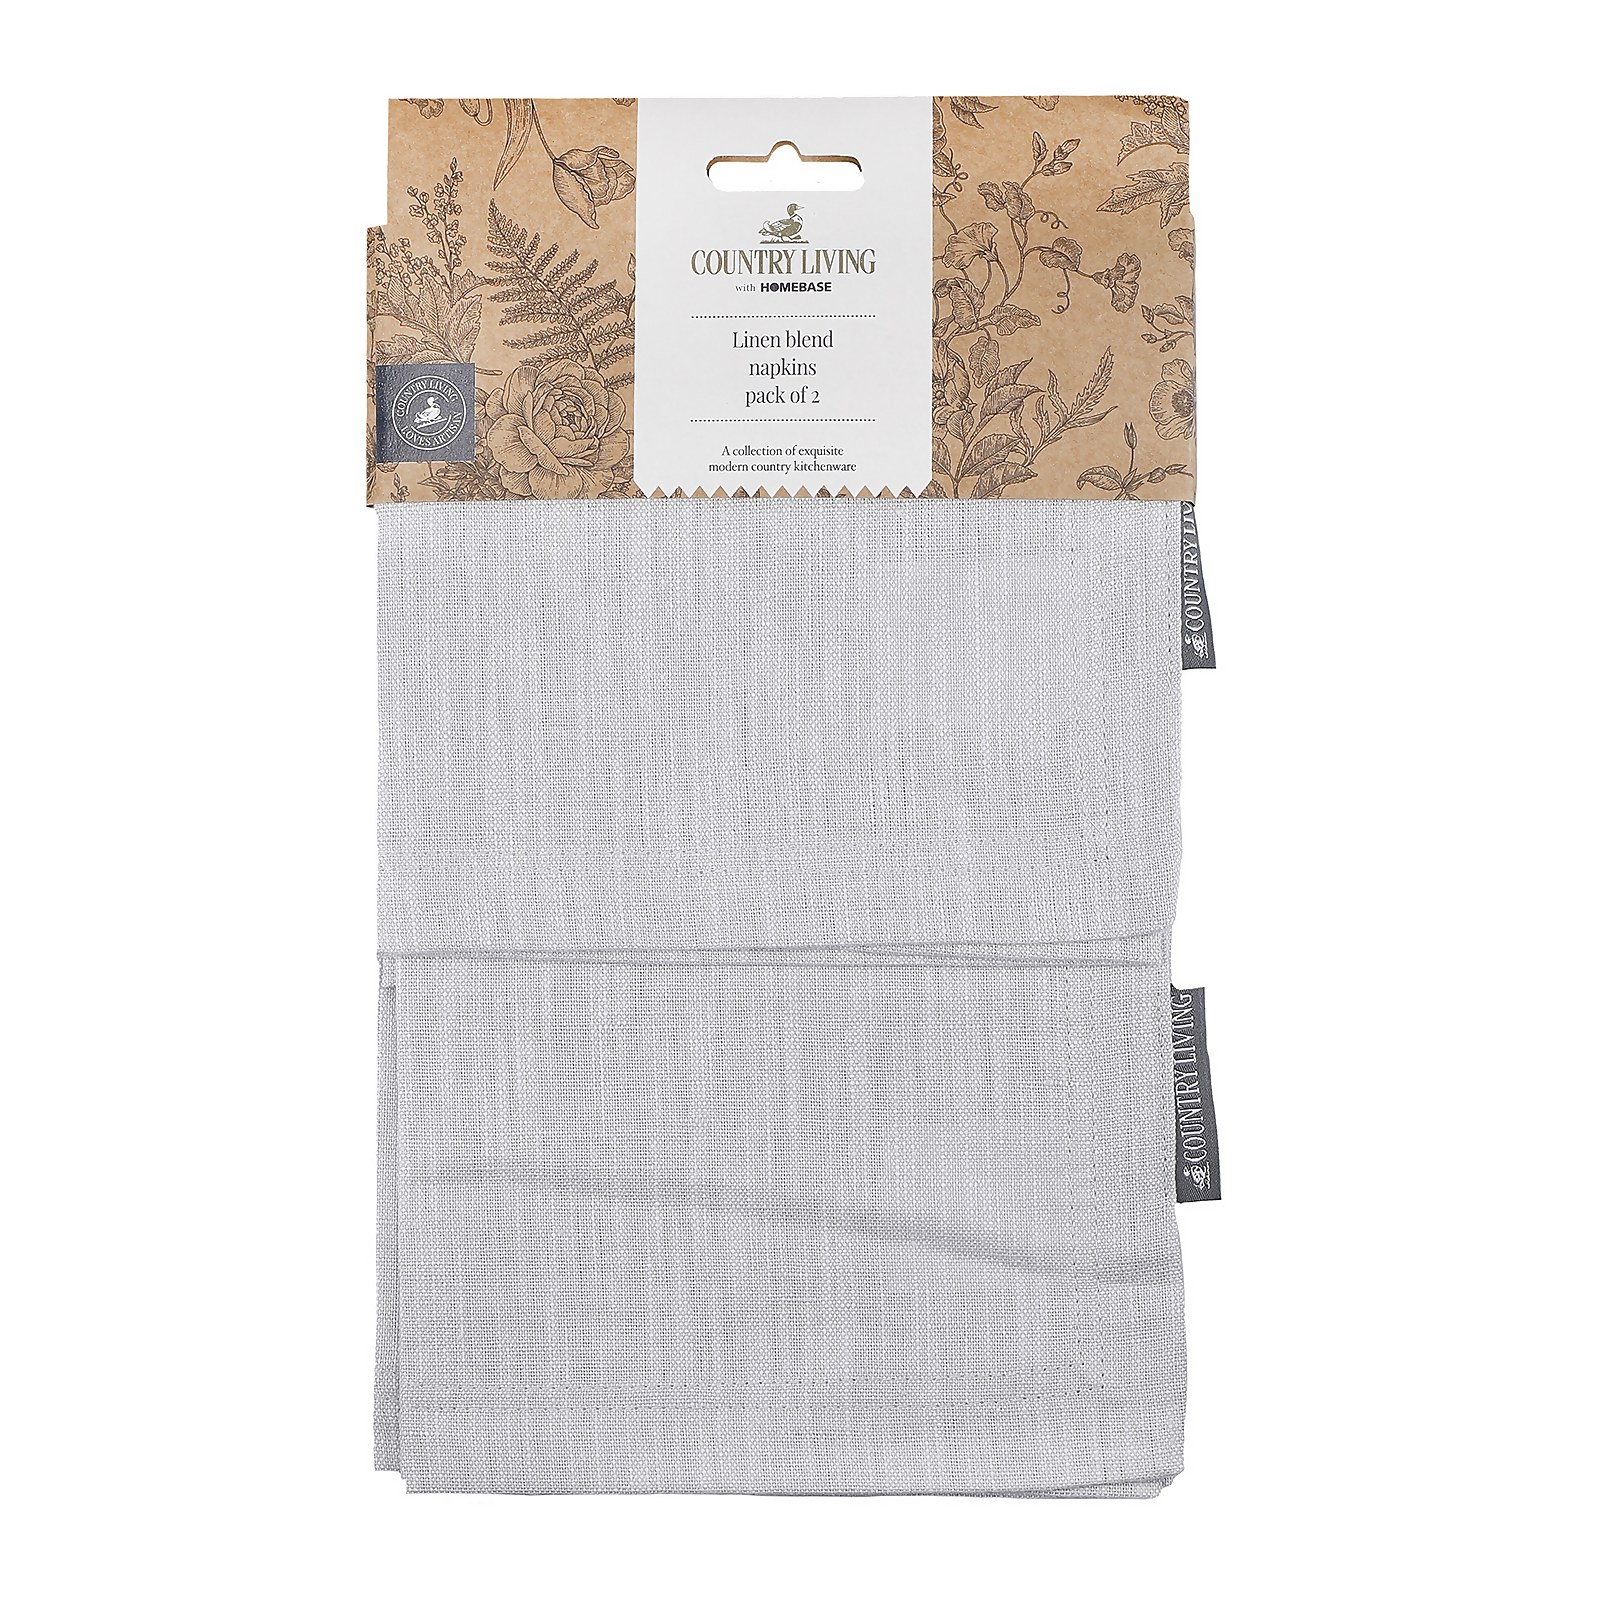 Photo of Country Living Linen Blend Napkins - 2 Pack - Grey